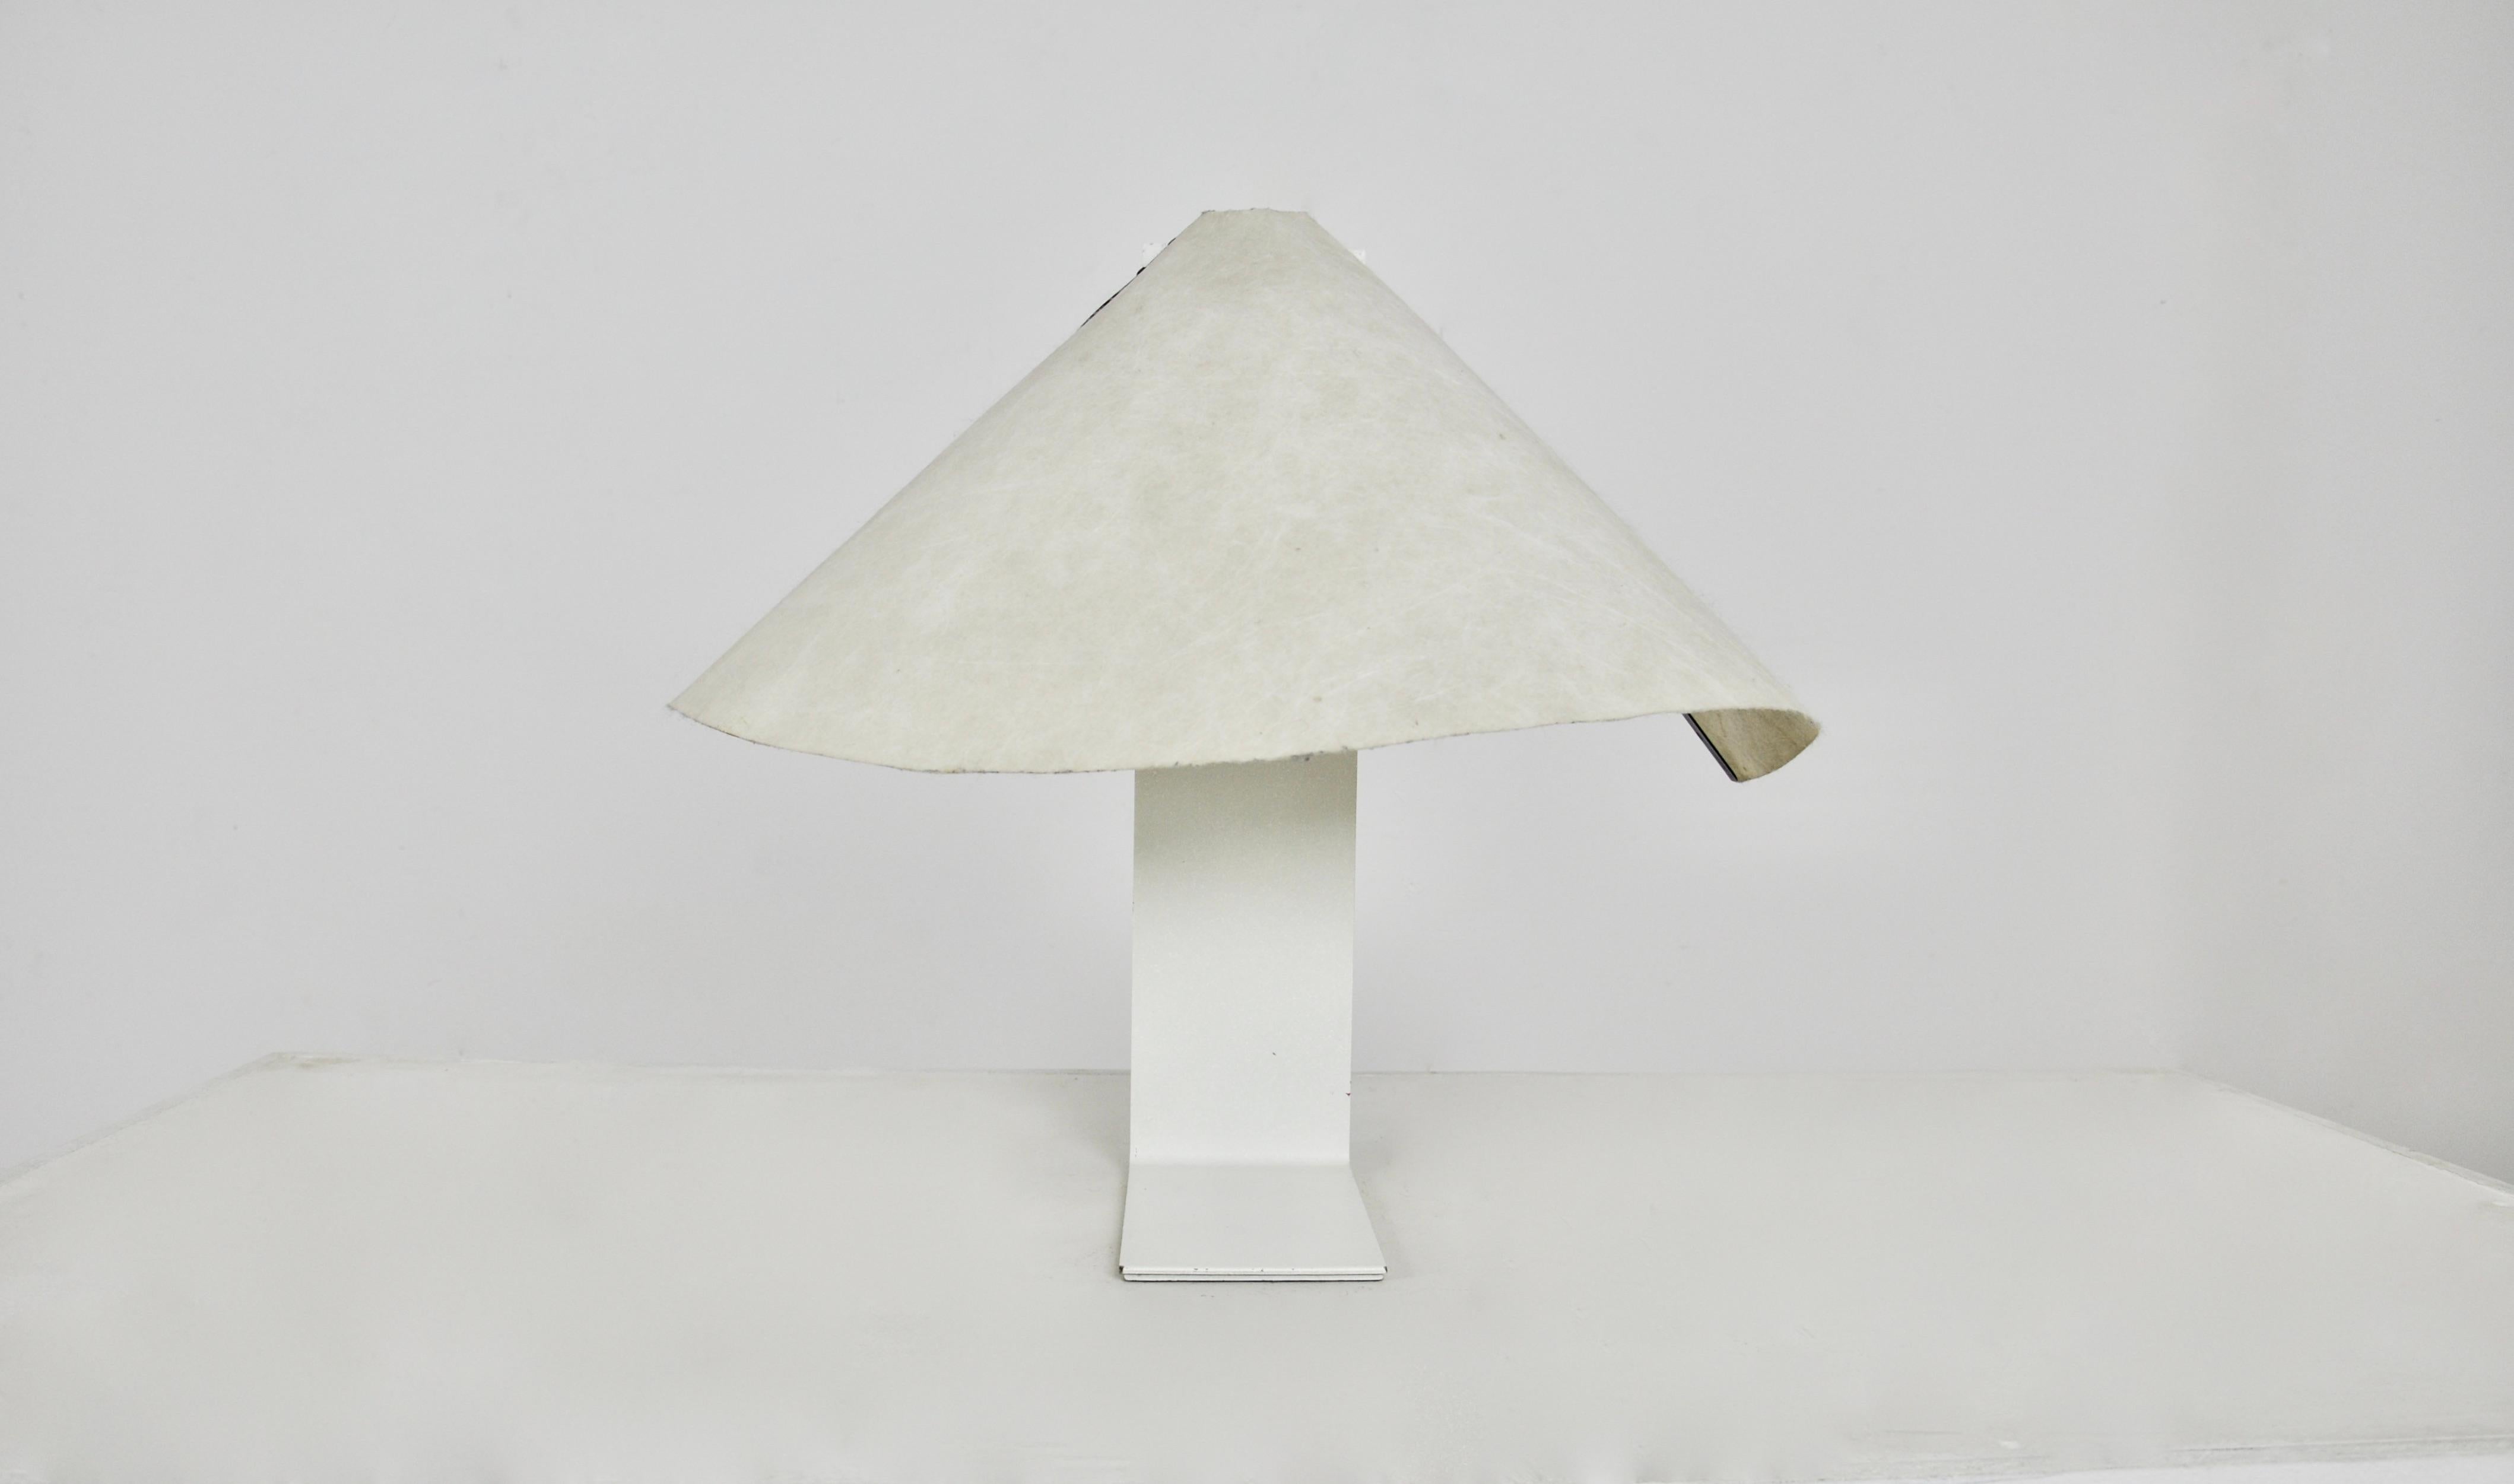 Lamp with white metal base and paper shade. Wear due to time and age of the lamp.
   